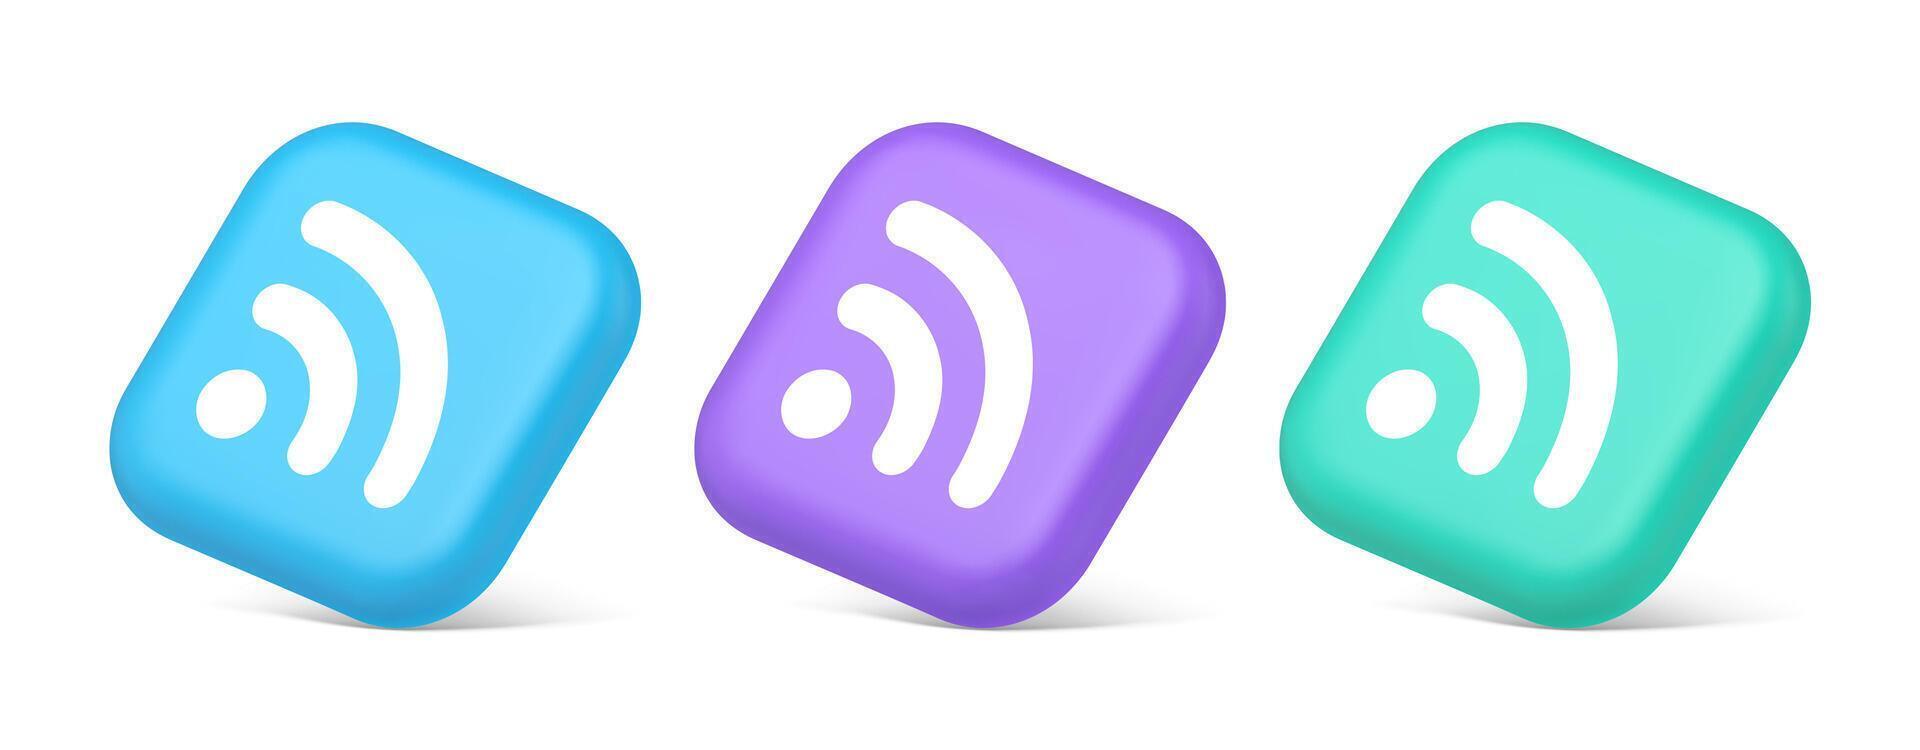 Wifi available access button wireless internet connection signal 3d realistic isometric icon vector